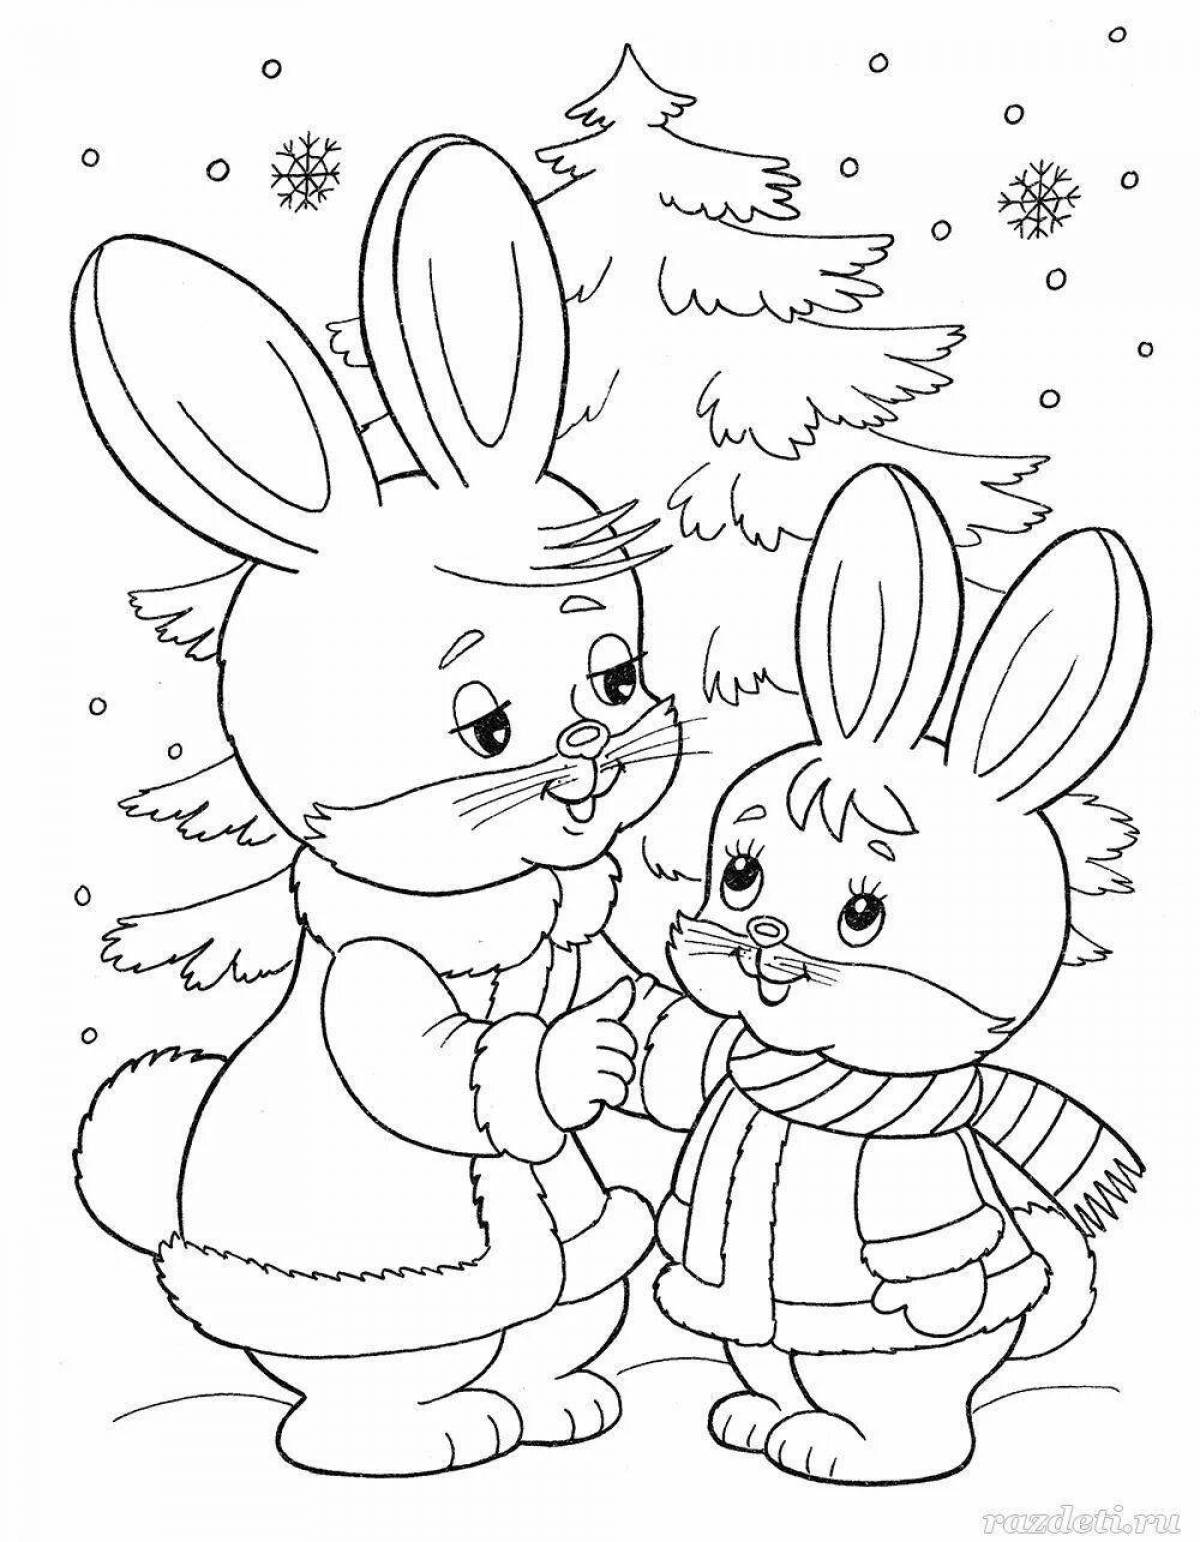 Live coloring for children 3-4 years old winter